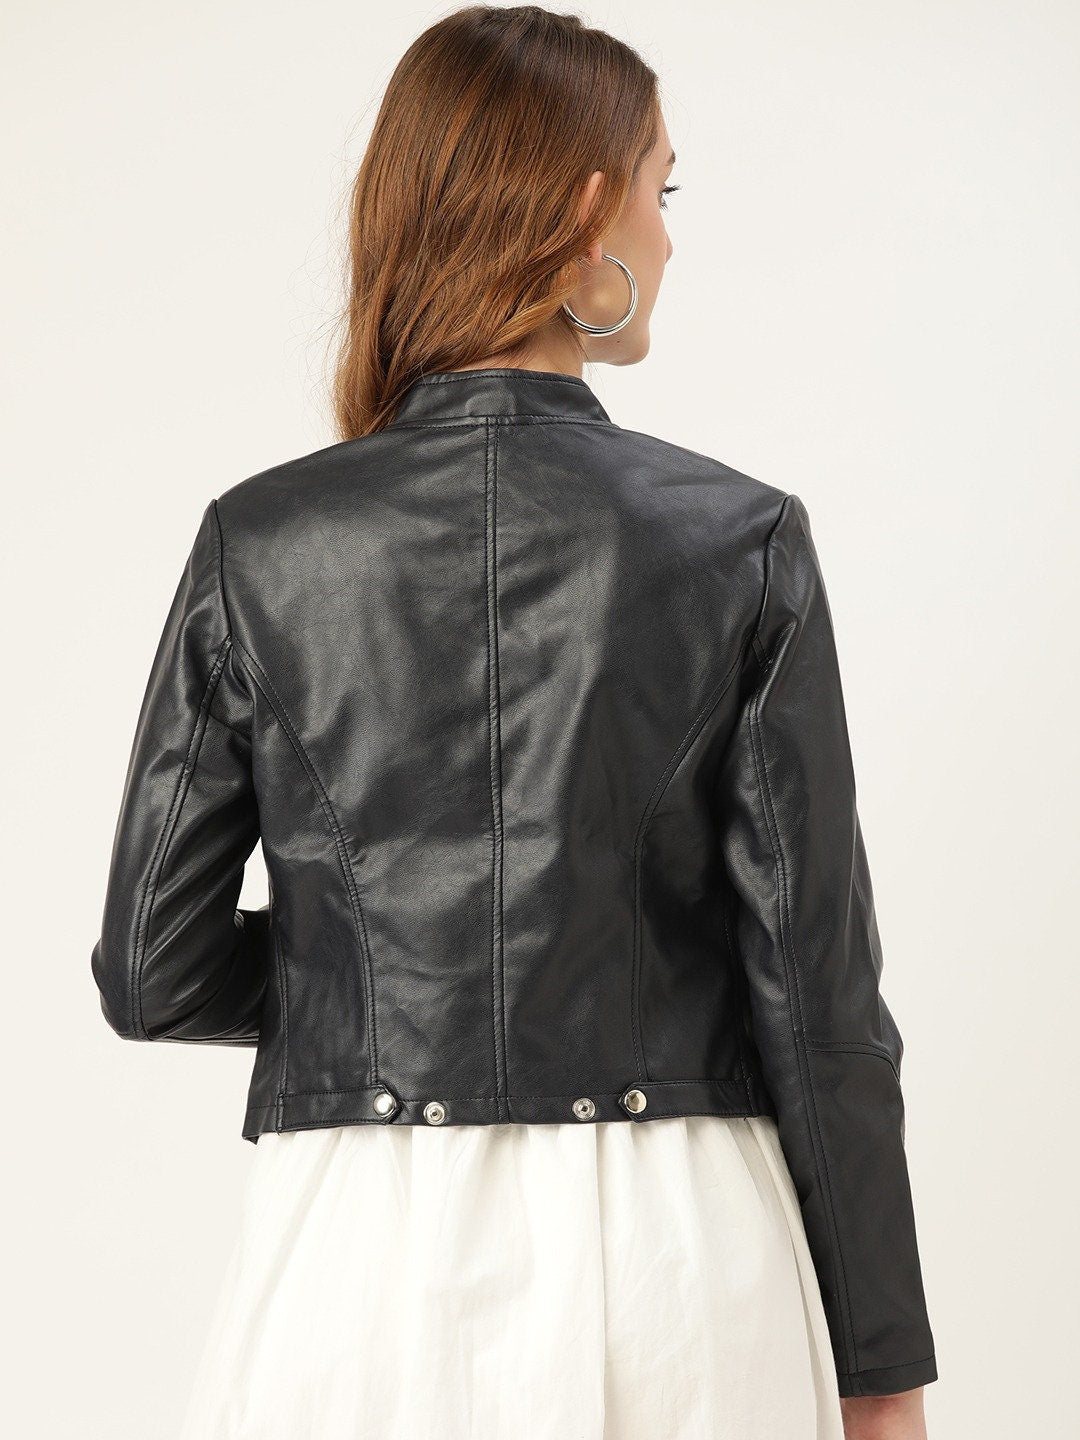 Black Lambskin Leather Biker Jacket Leather Cropped Jacket Leather Coat Slim Fit Leather Jacket | Gift for Her | Christmas Gift for Her